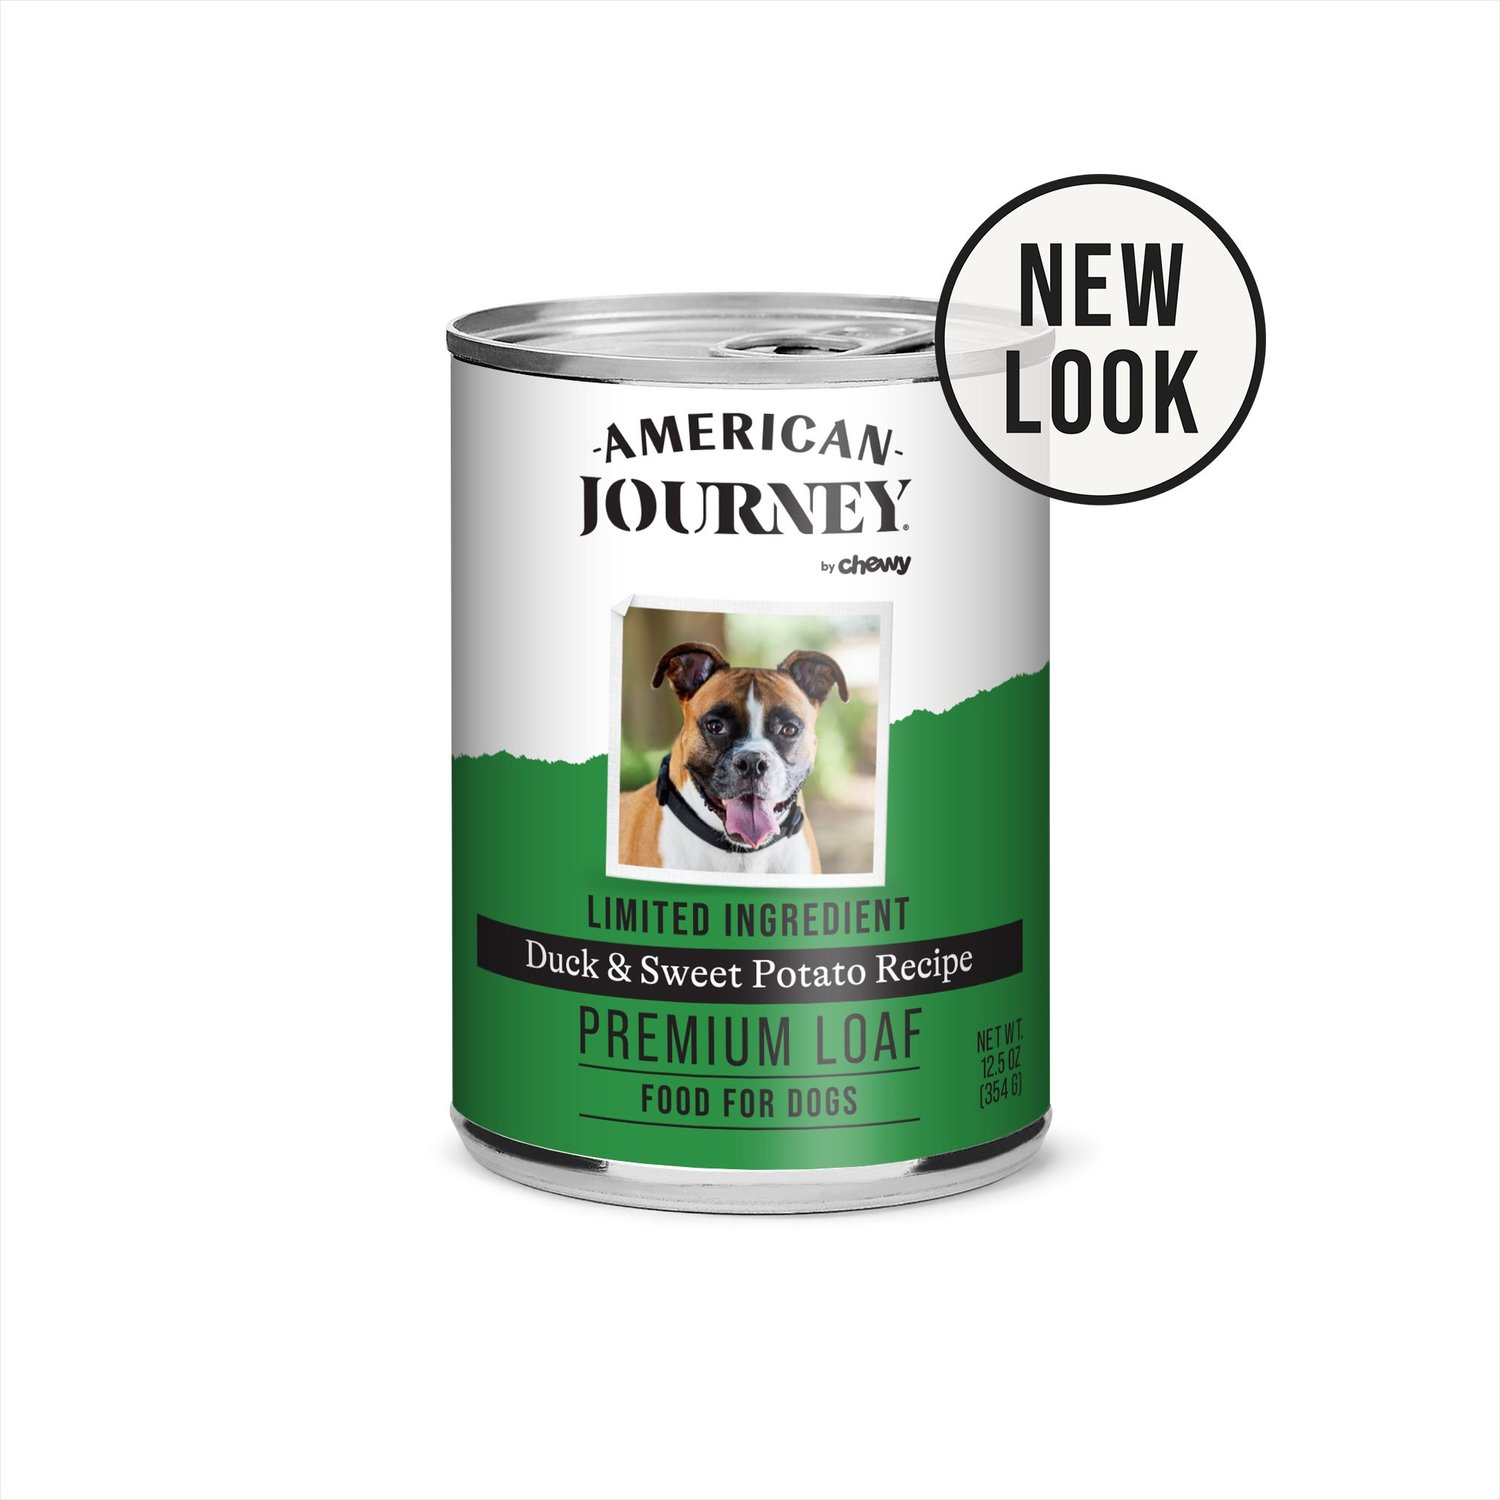 american journey canned dog food